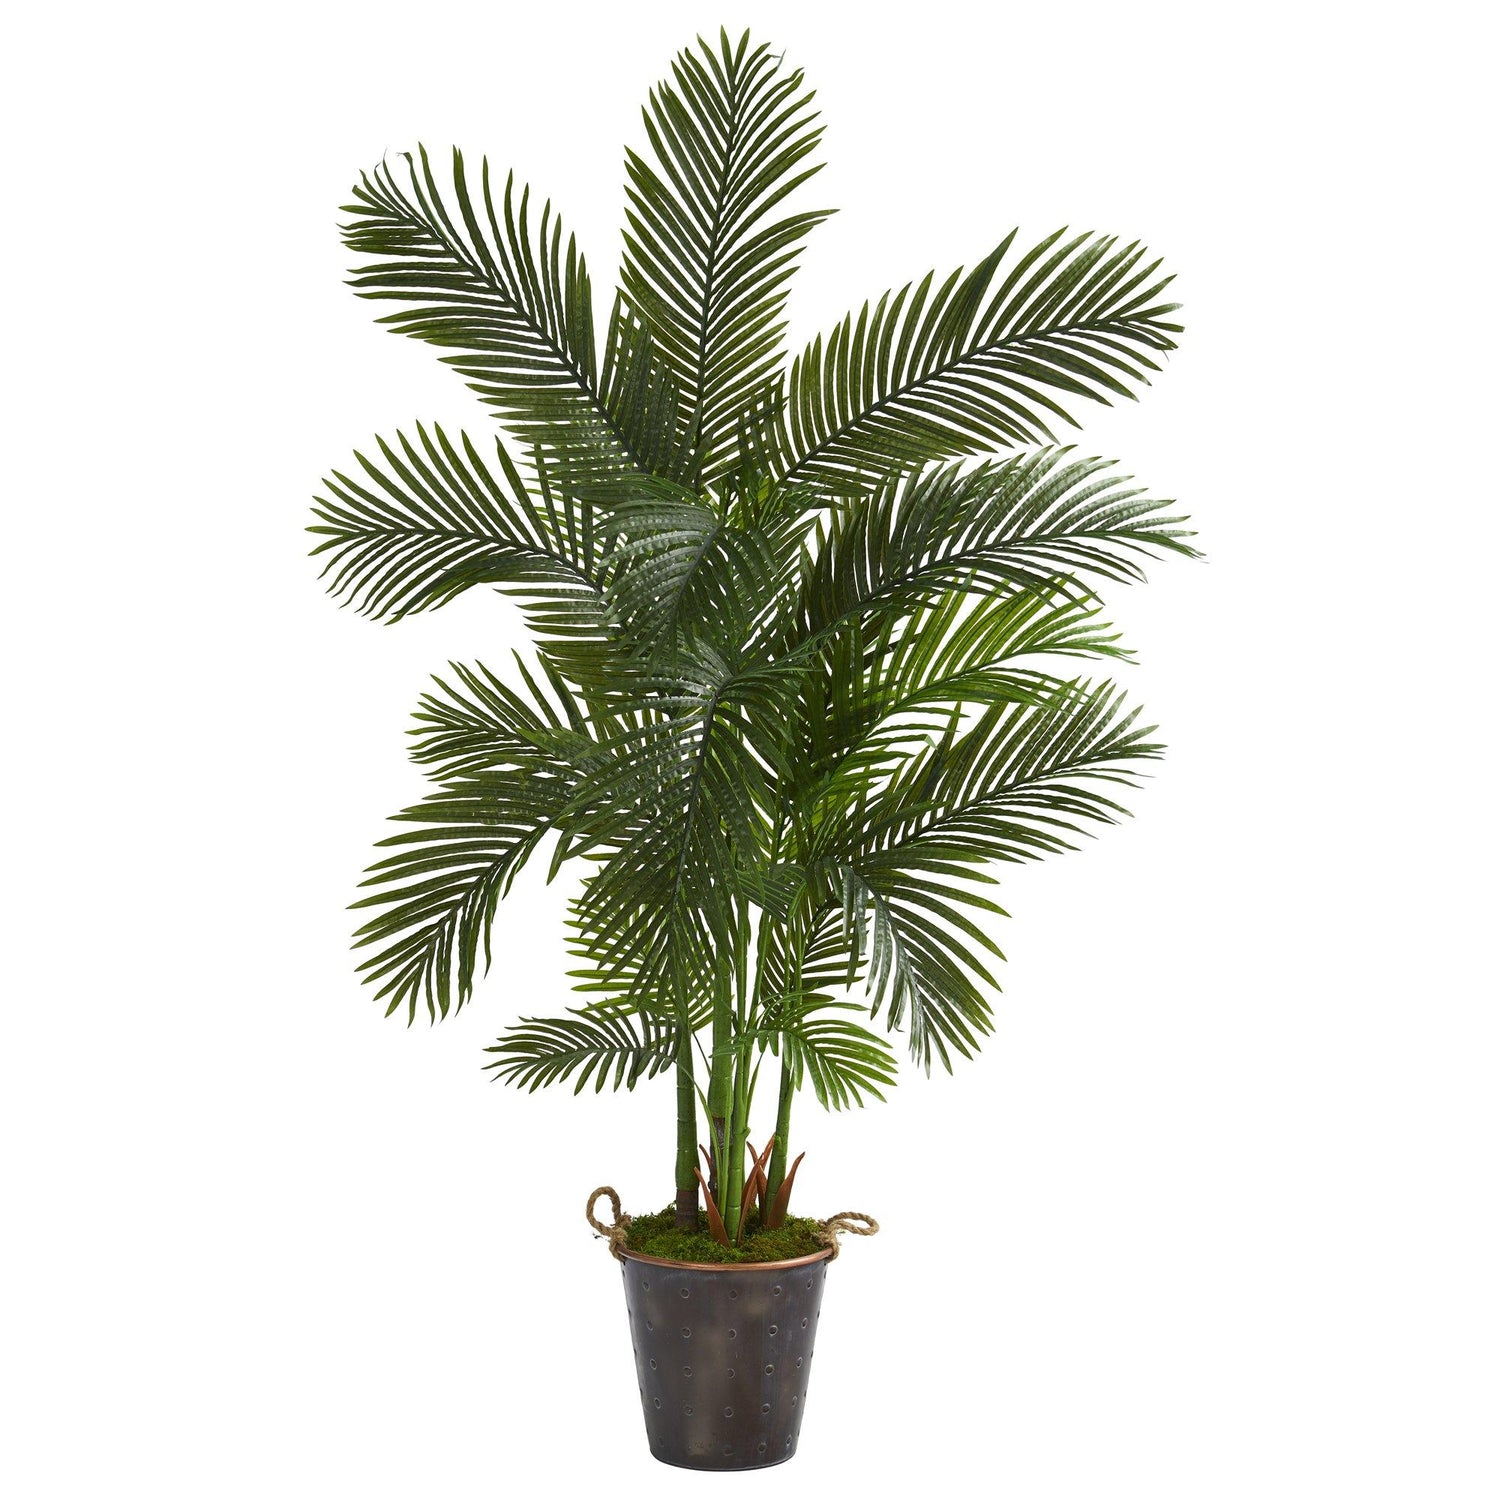 69” Areca Palm Artificial Tree in Decorative Metal Pail with Rope